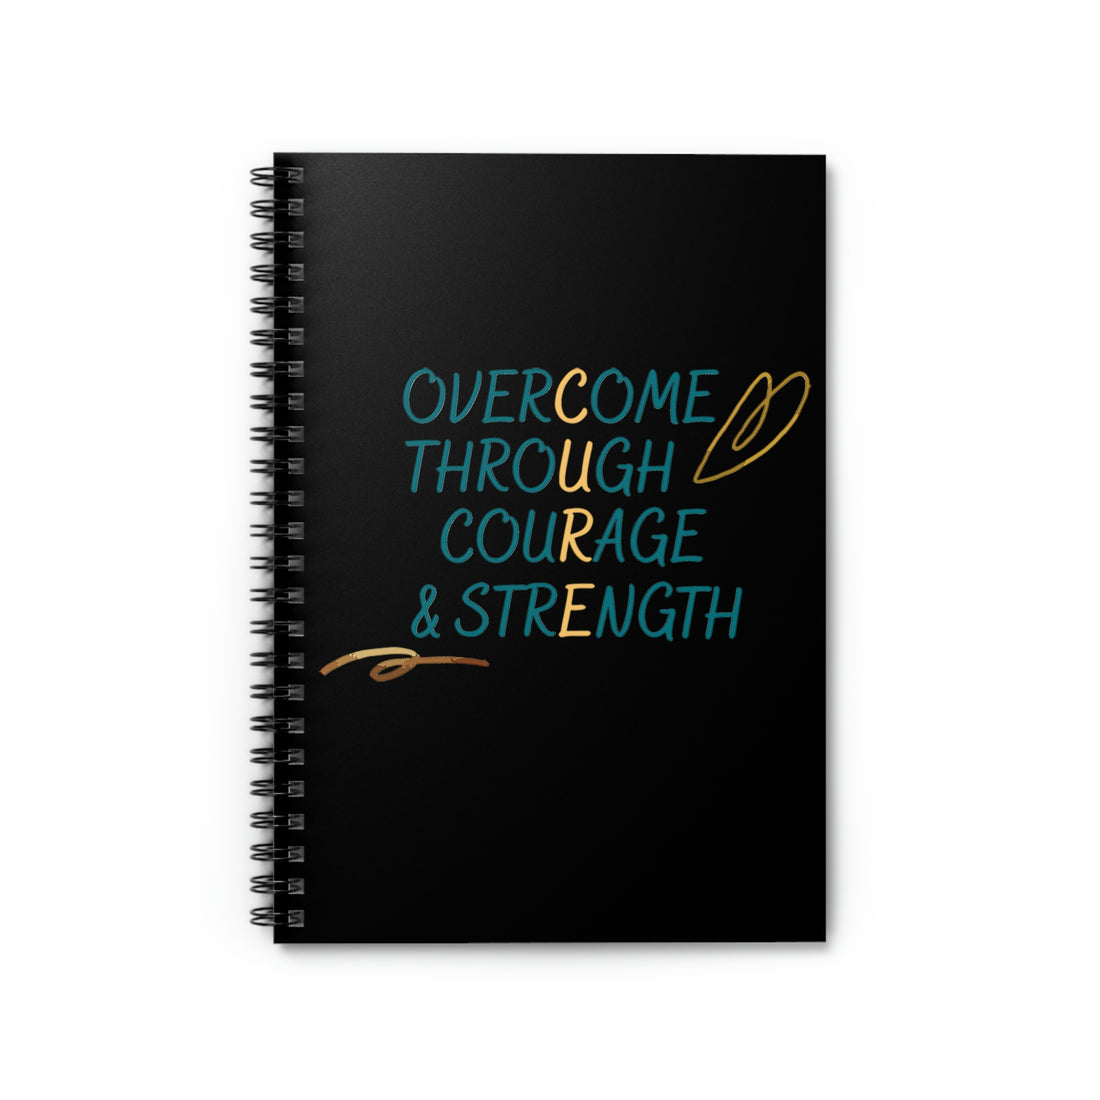 Overcome Through Courage and Strength - Spiral Notebook - Ruled Line